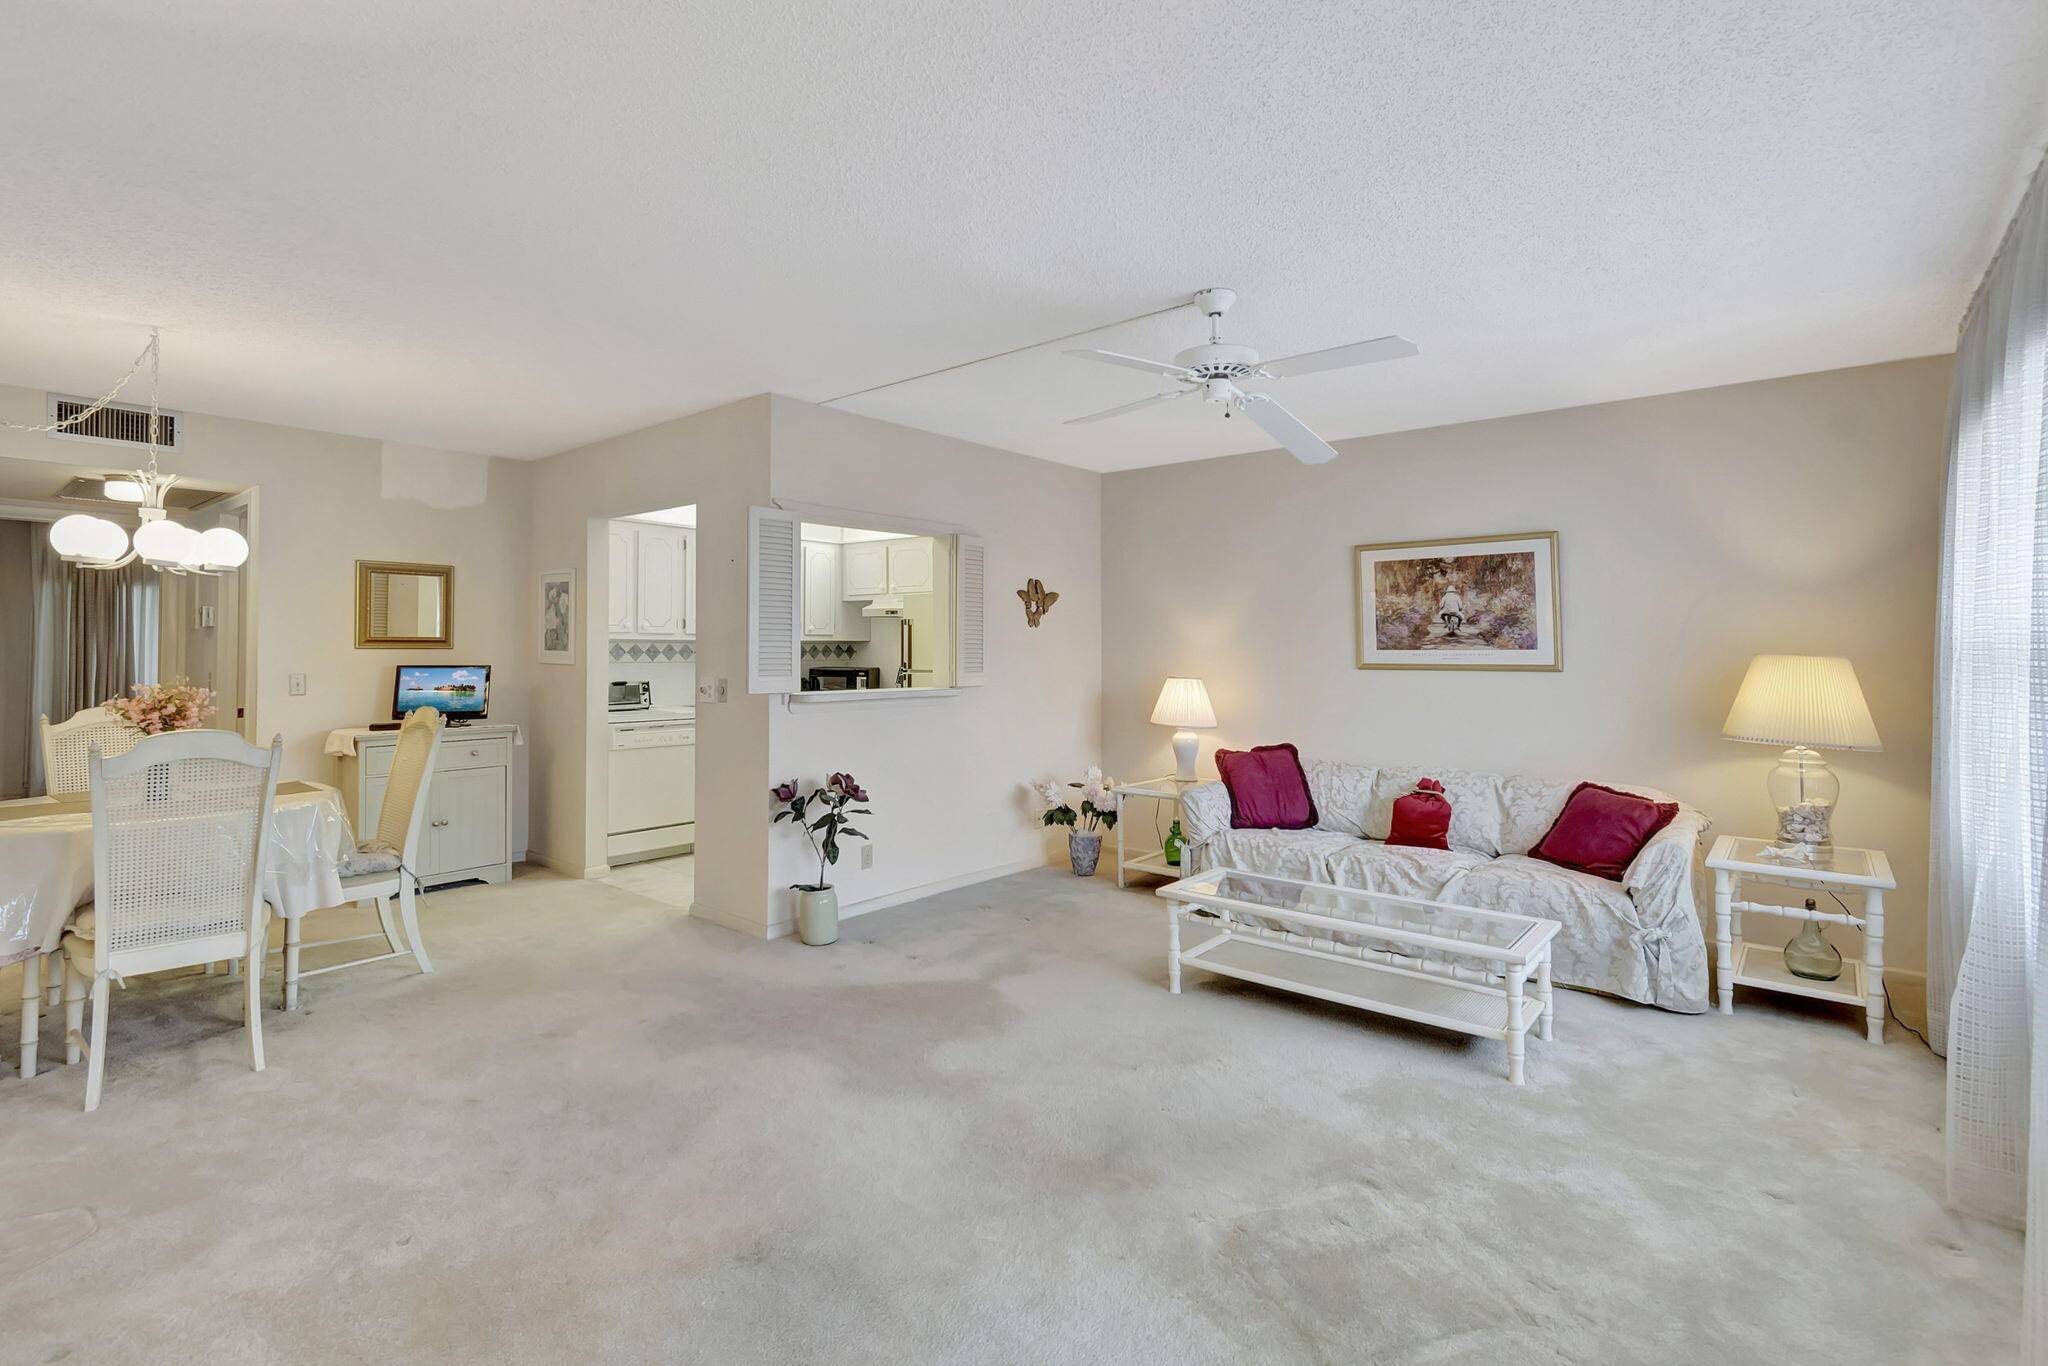 This lovely condo is situated in the sought after Century Village Active Adult Community.